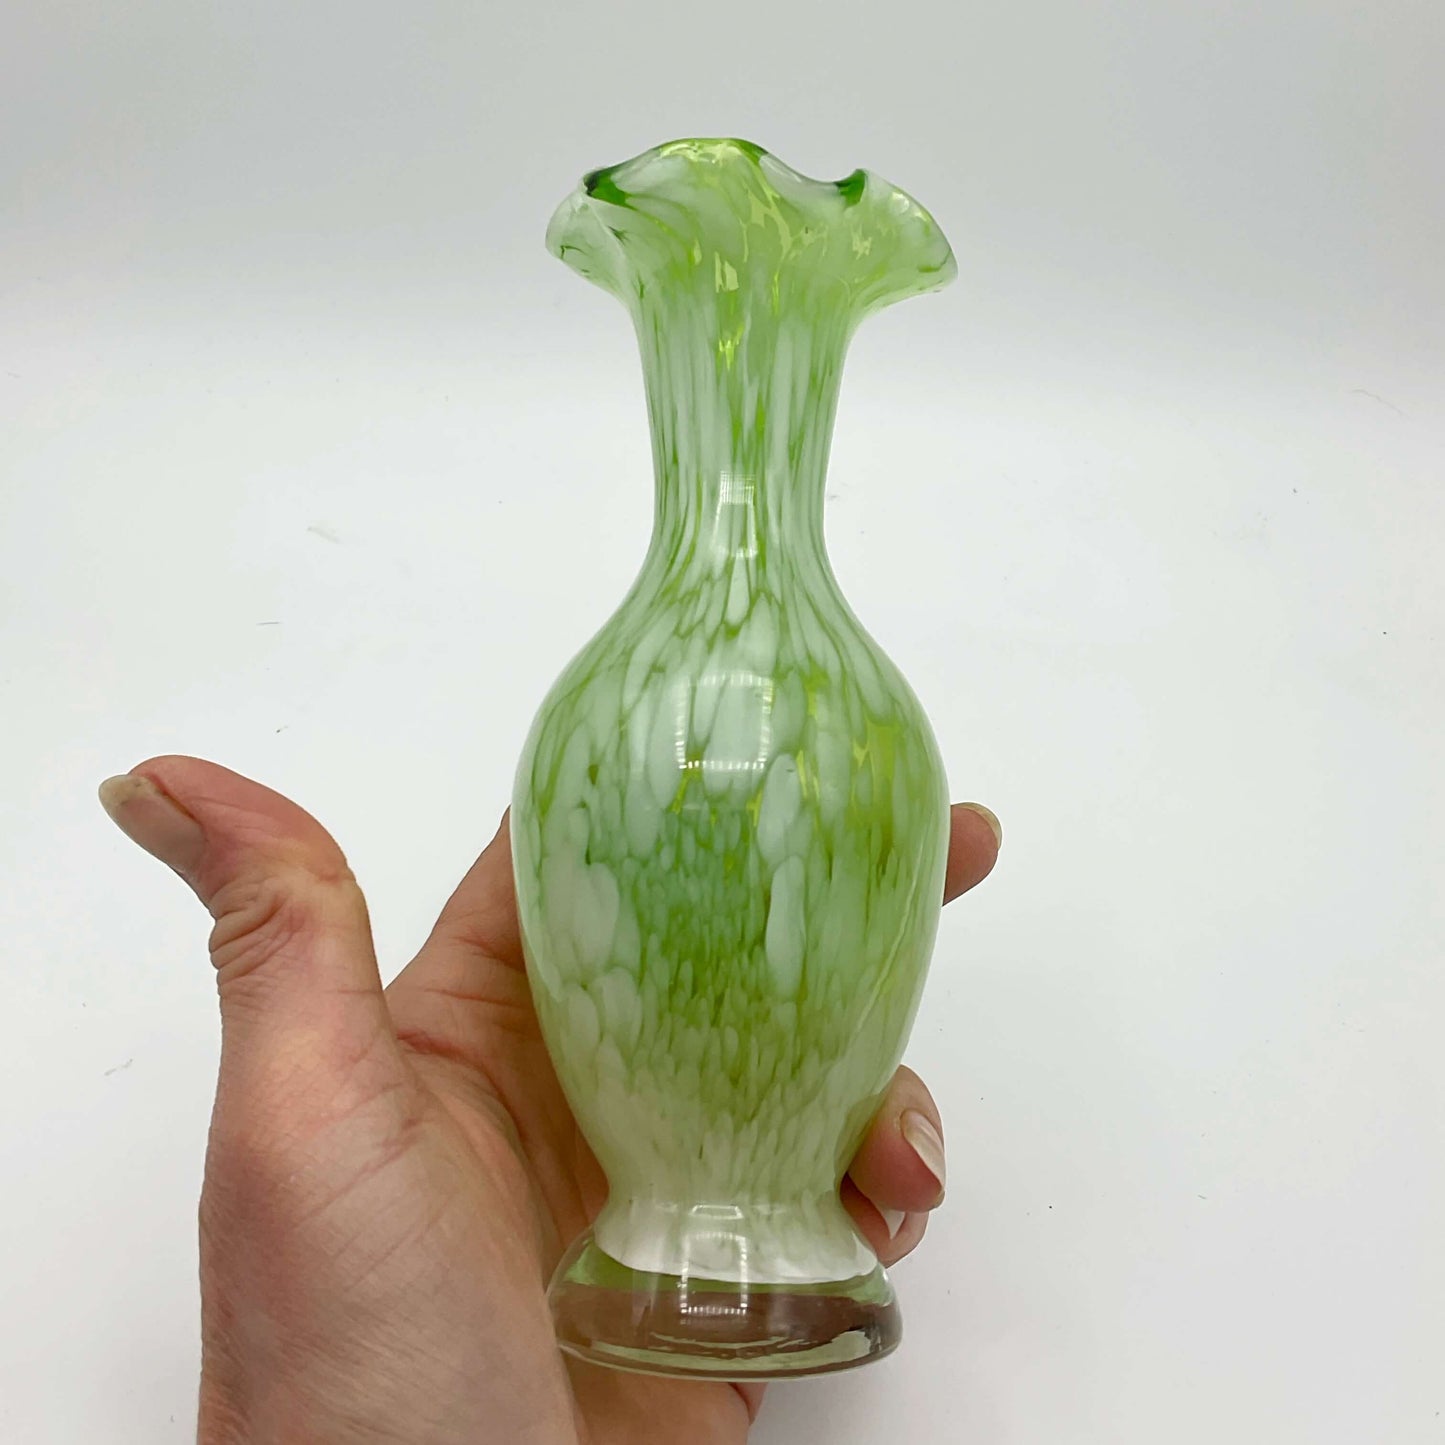 Green and white Murano glass bud vase from the 1960s held in a hand on a white background 